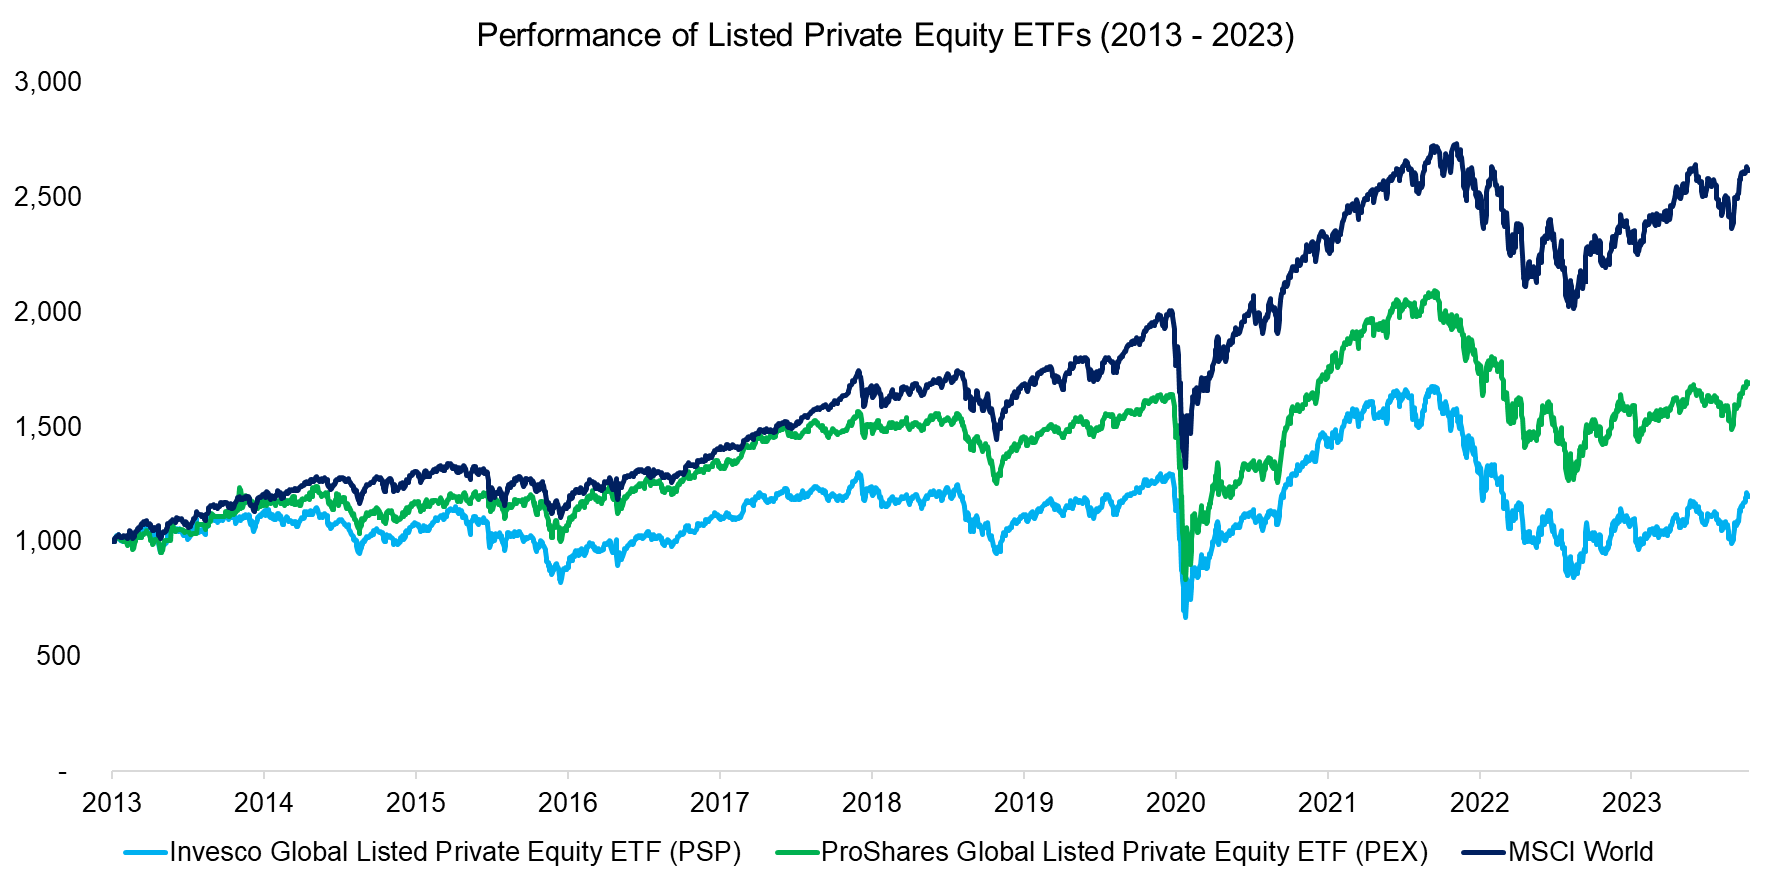 Performance of Listed Private Equity ETFs (2013 - 2023)